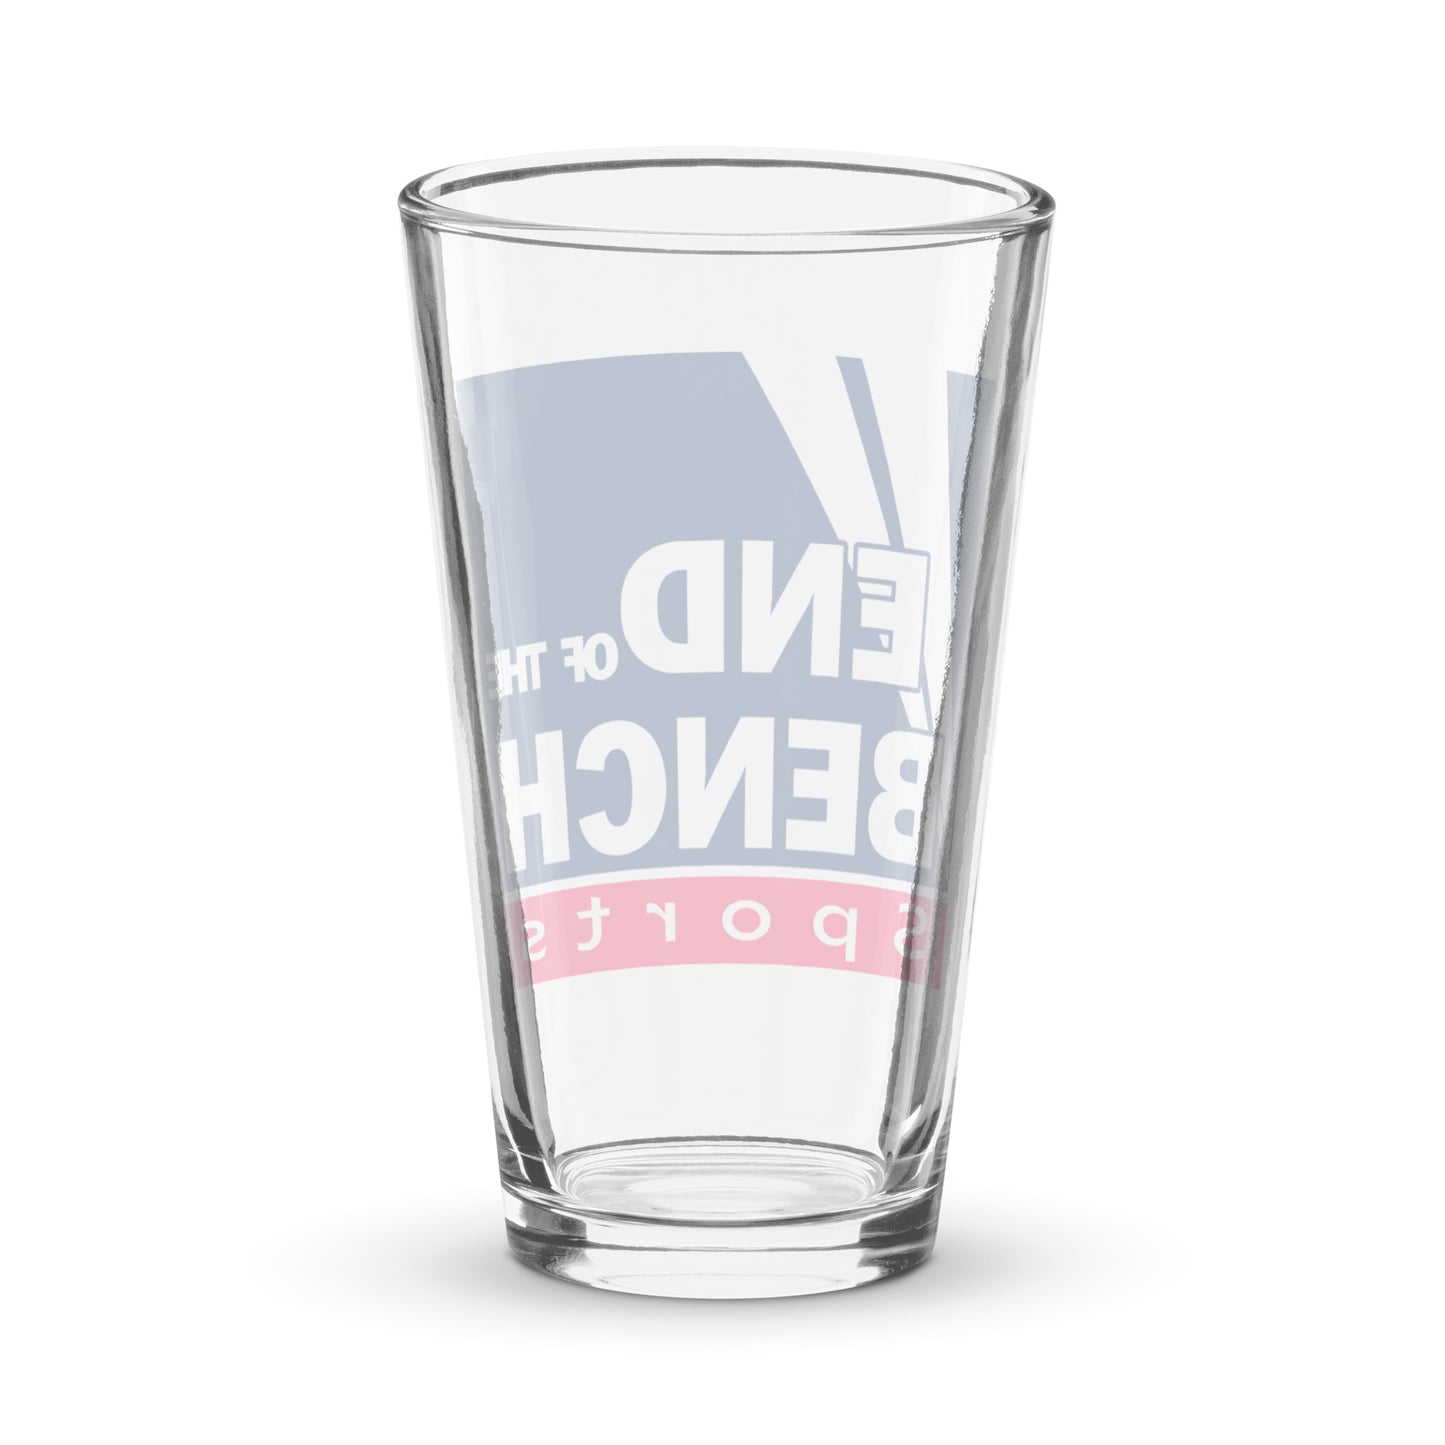 The Right Drinking Glass